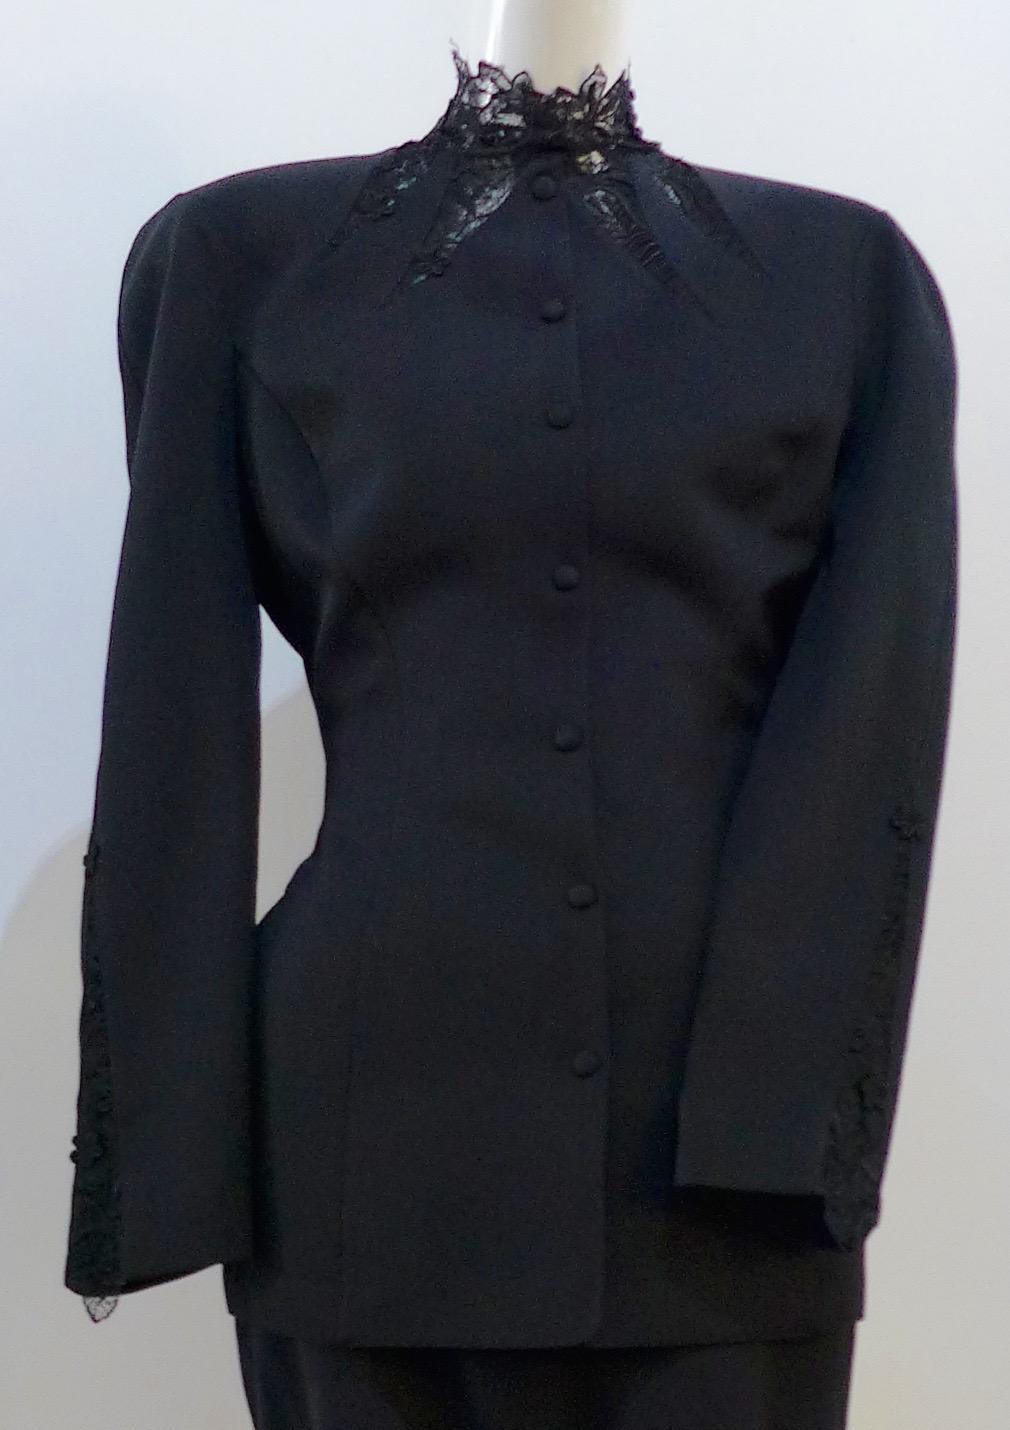 This THIERRY MUGLER skirt suit is composed of a black polyester and lace fabric. Features a classic Mugler silhouette with nipped waist and curved bust-line to neckline design. The jacket has front snap closures, rounded shoulders, and lace panels